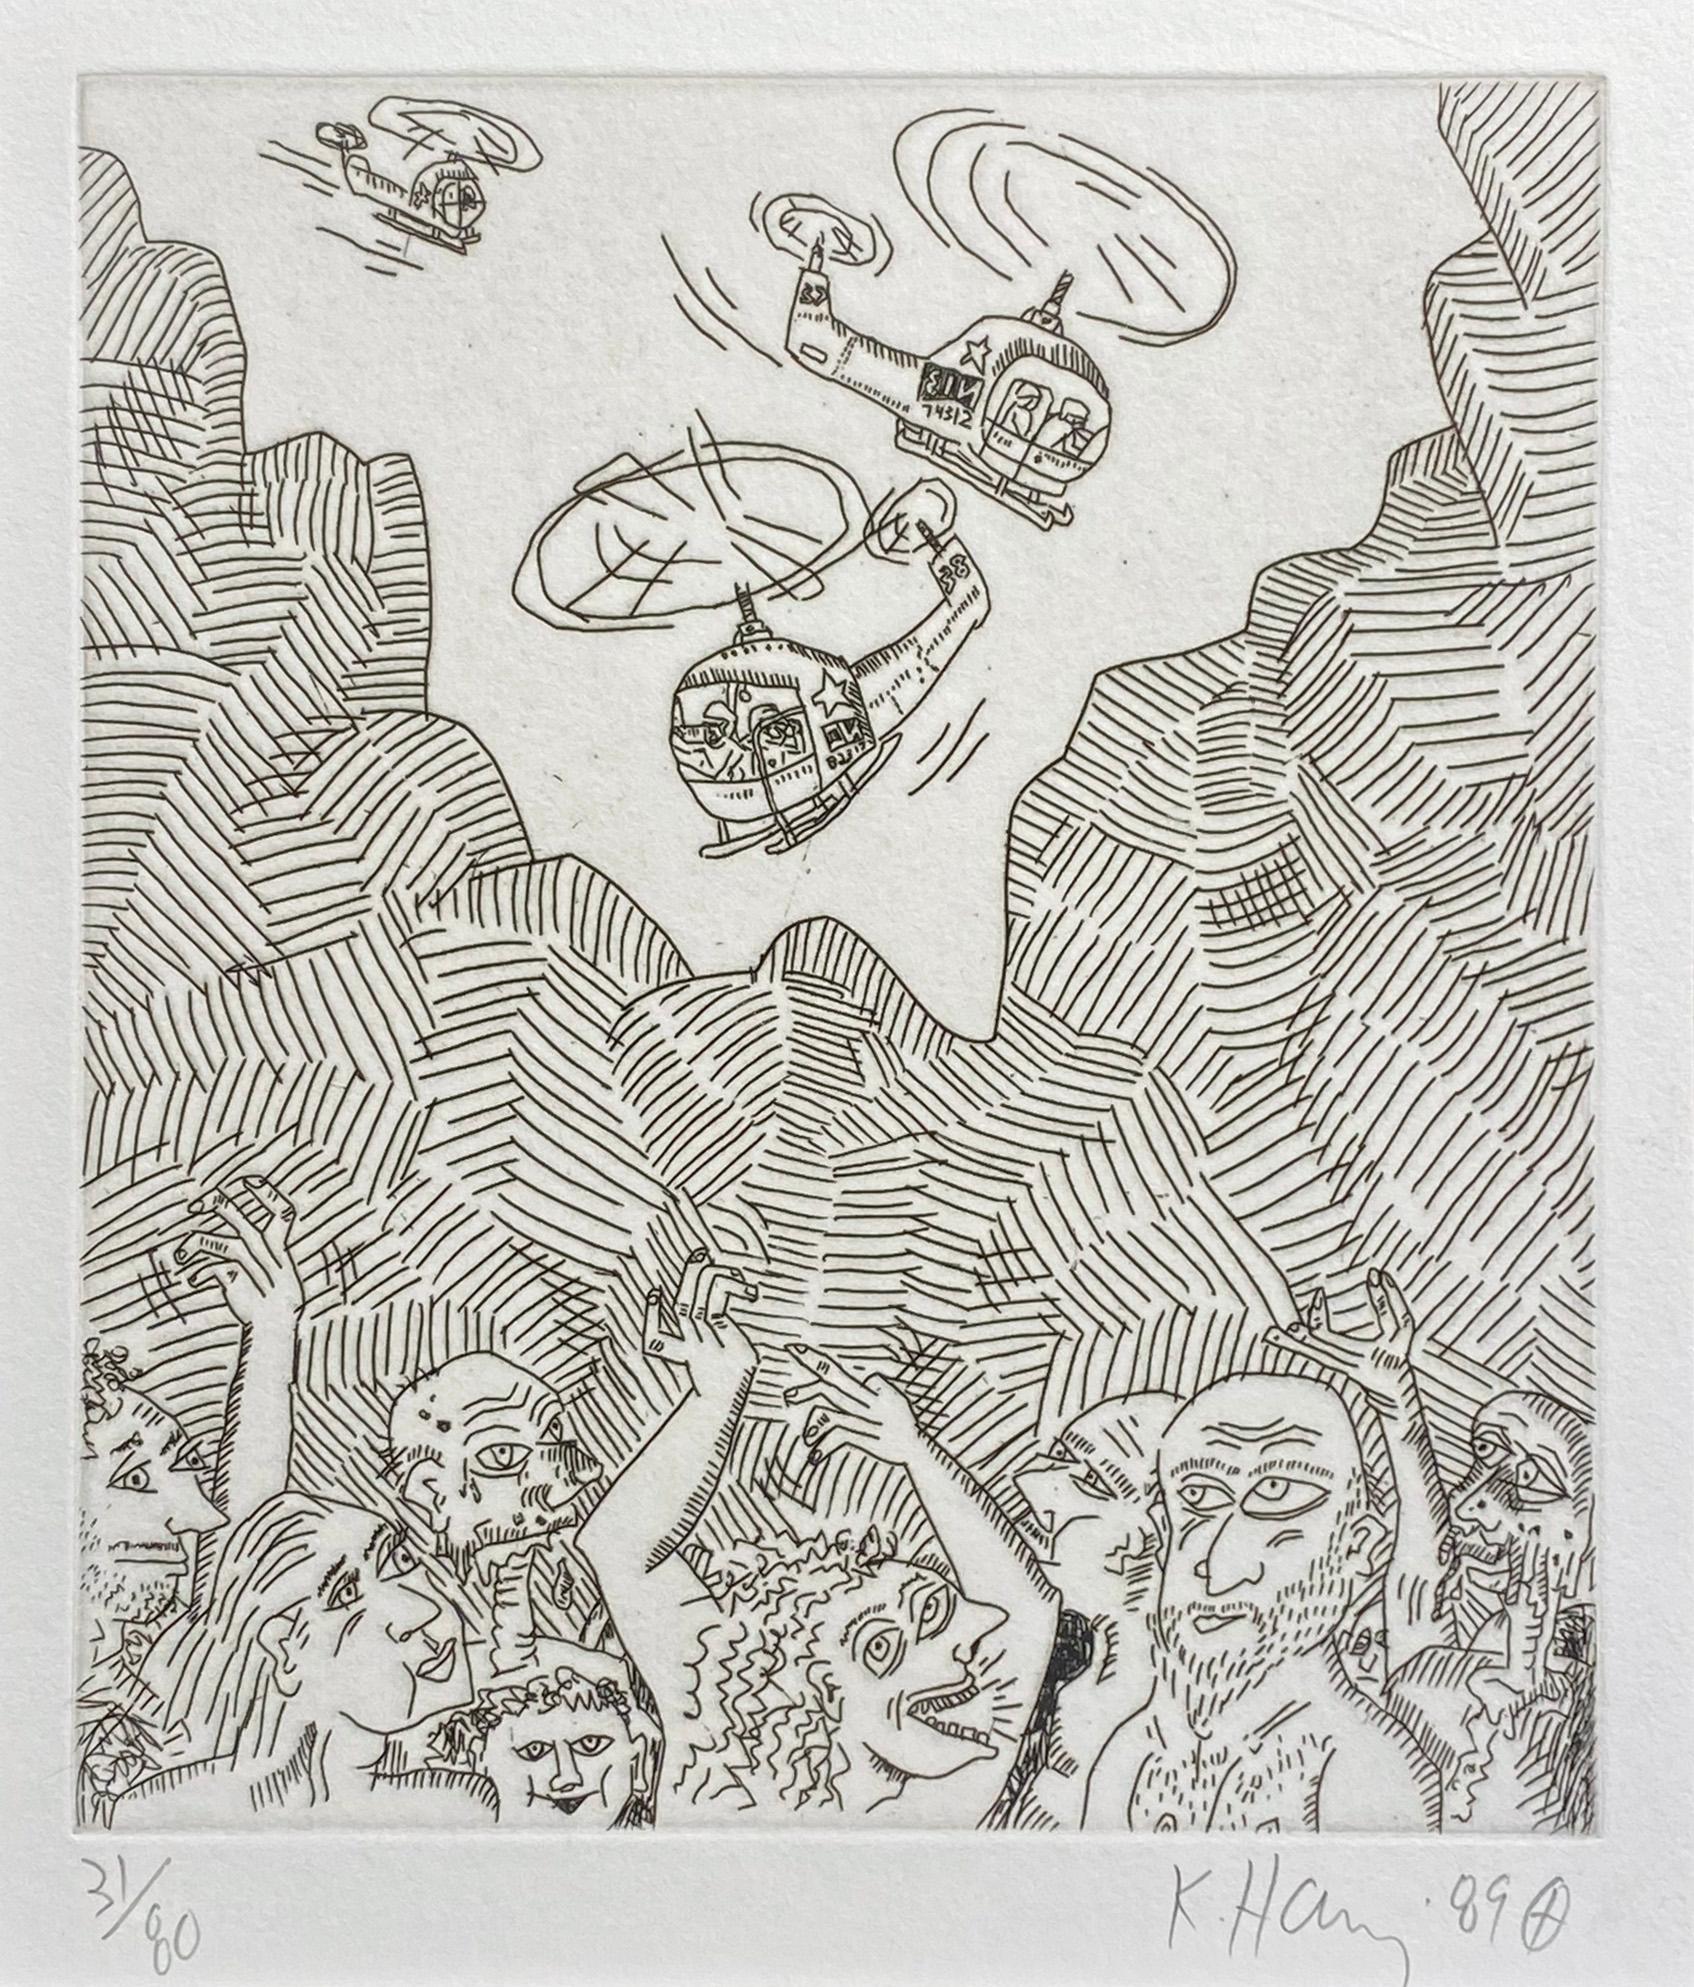 Keith Haring Figurative Print - Helicopters, Mountains, People (from The Valley Suite)